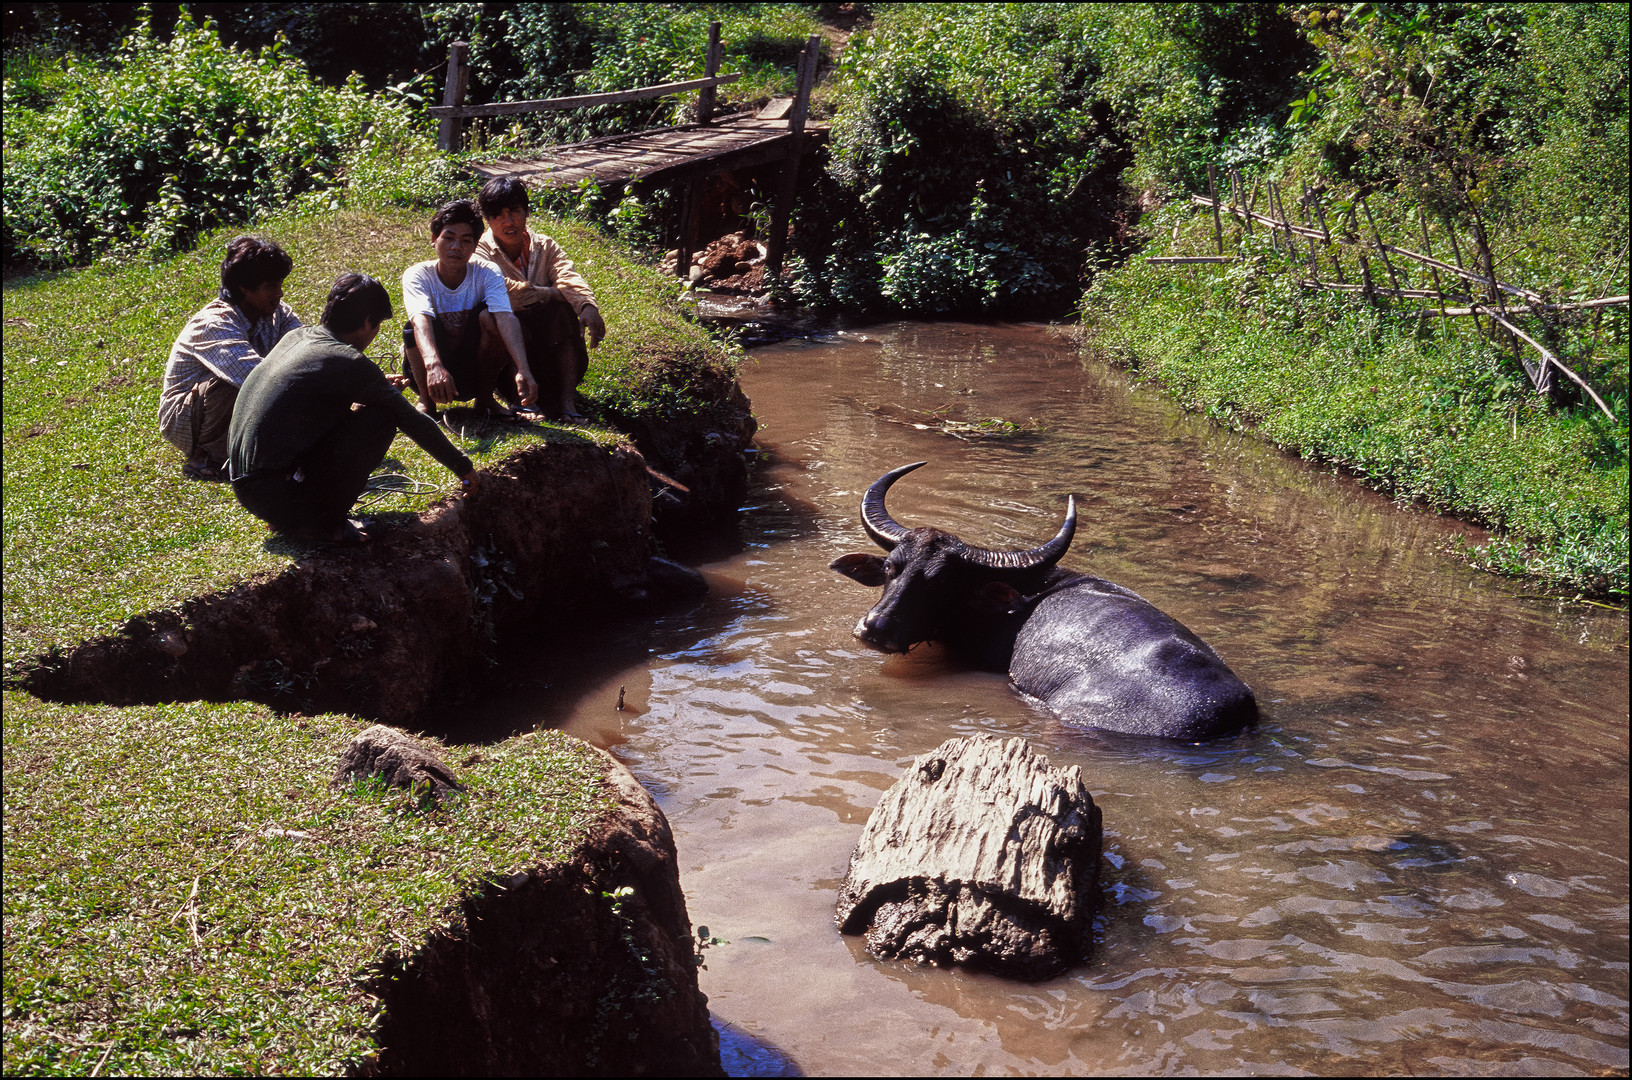 Water Buffalo and Friends. Hsipaw, Shan State, Myanmar.